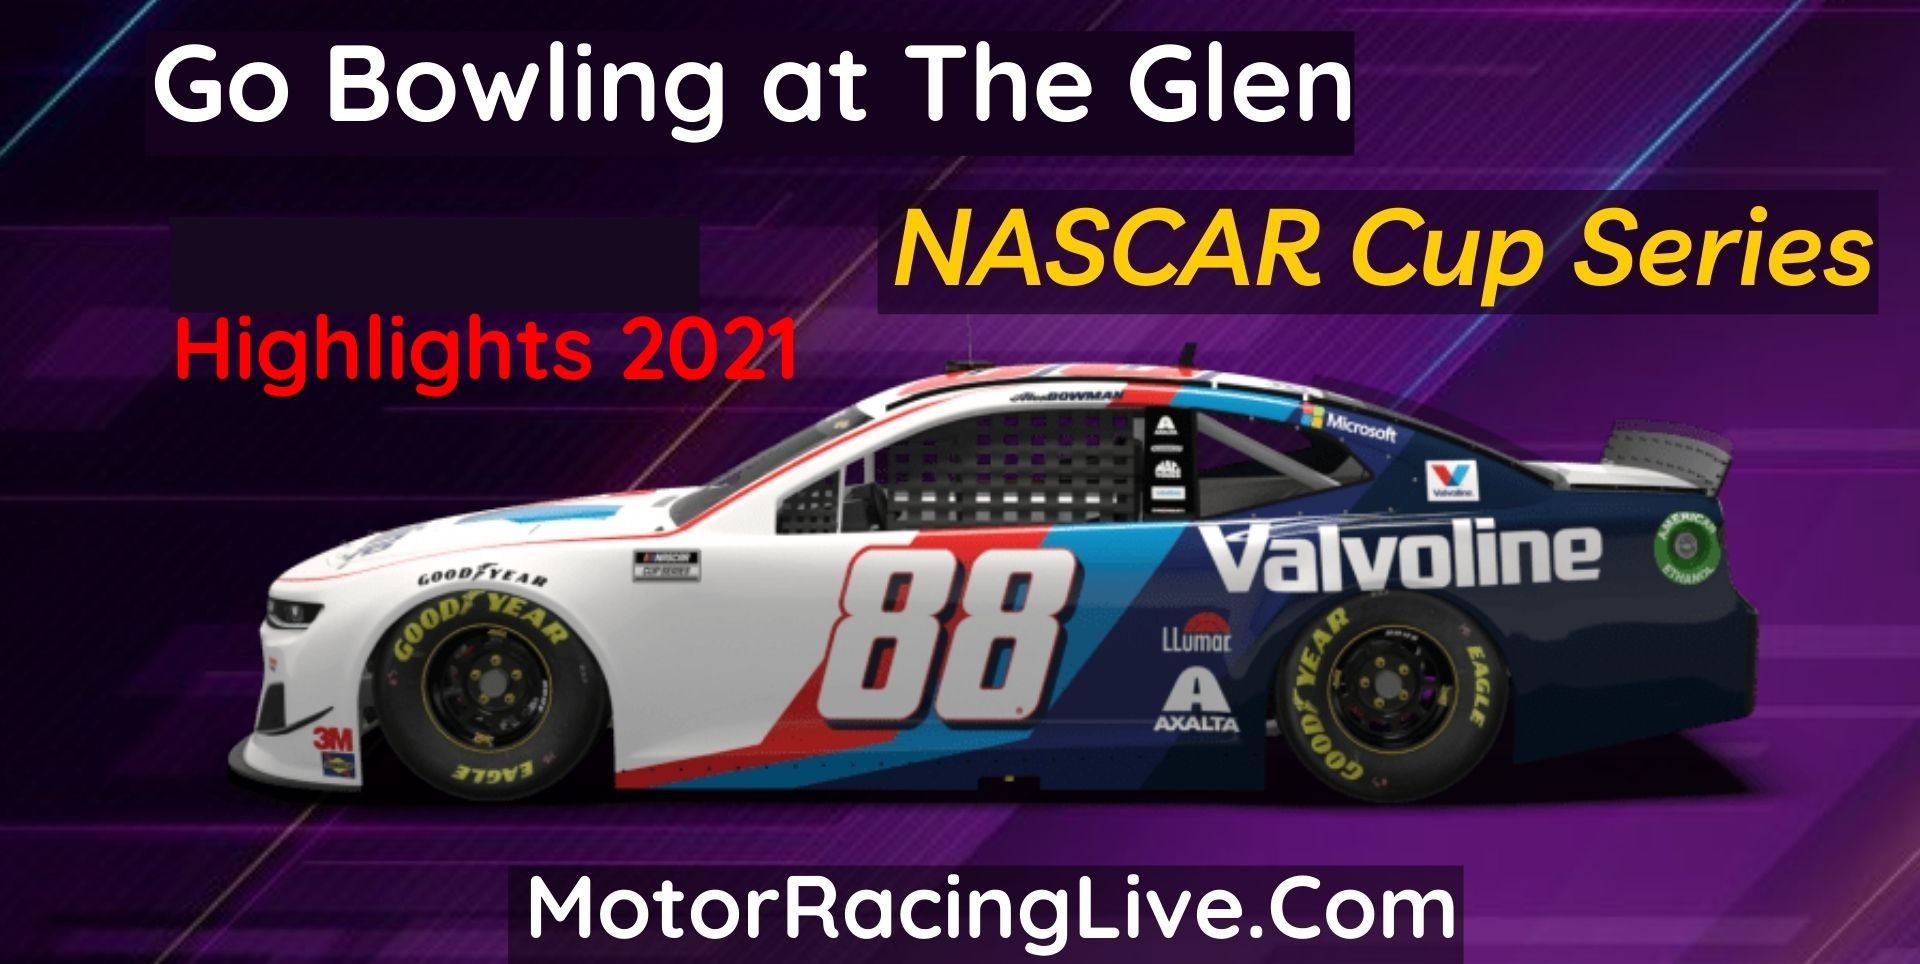 Go Bowling At The Glen Highlights 2021 NASCAR Cup Series